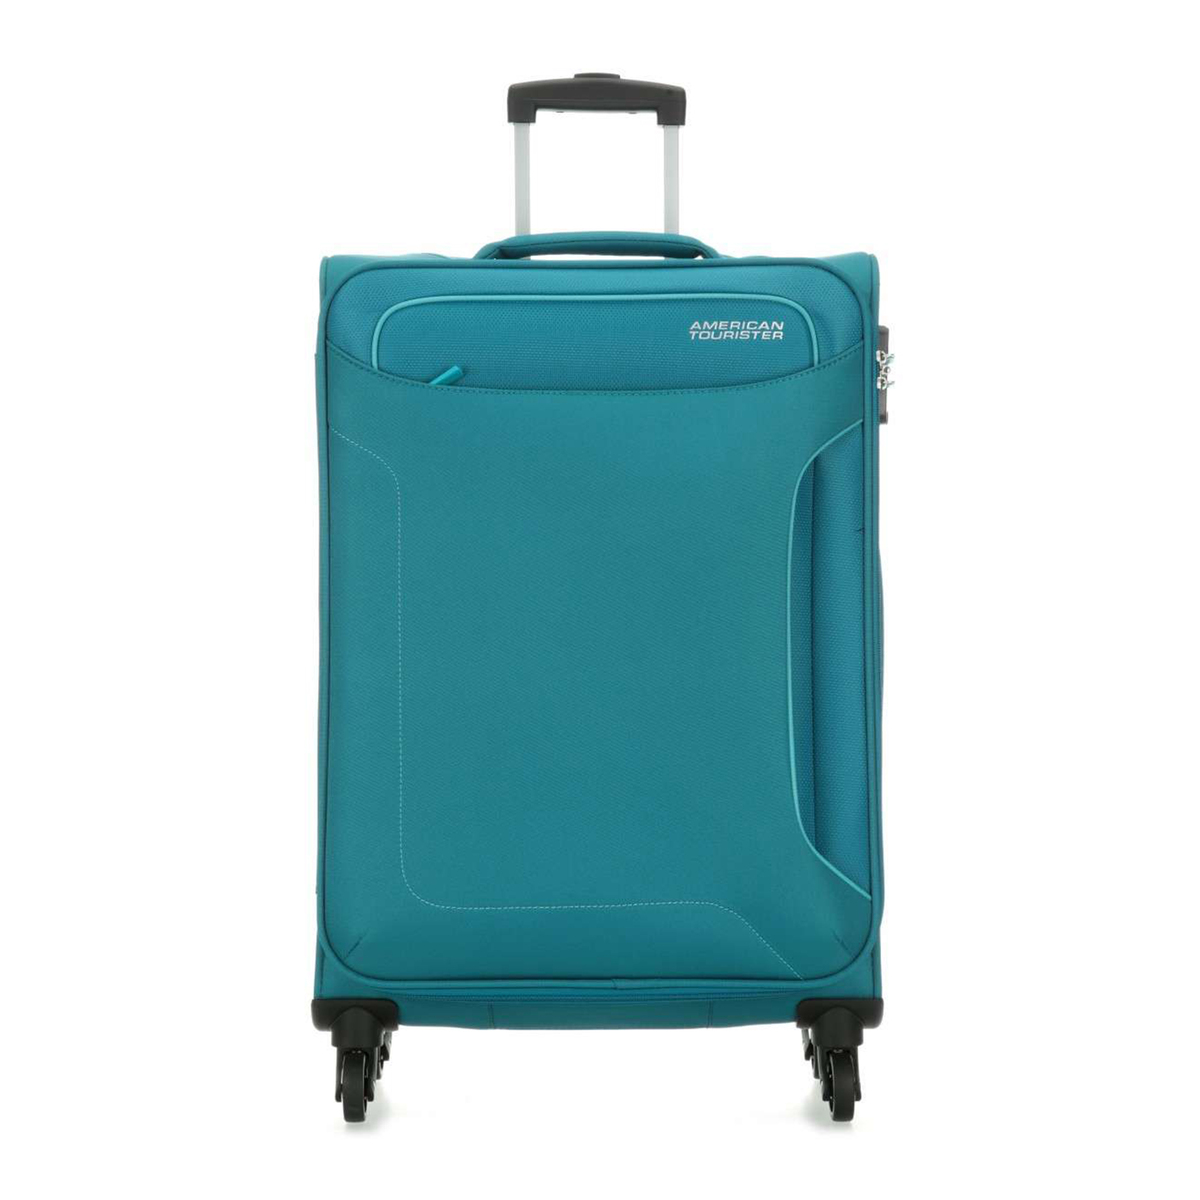 American Tourister Holiday 4 Wheel Soft Trolley, 80 cm, Teal